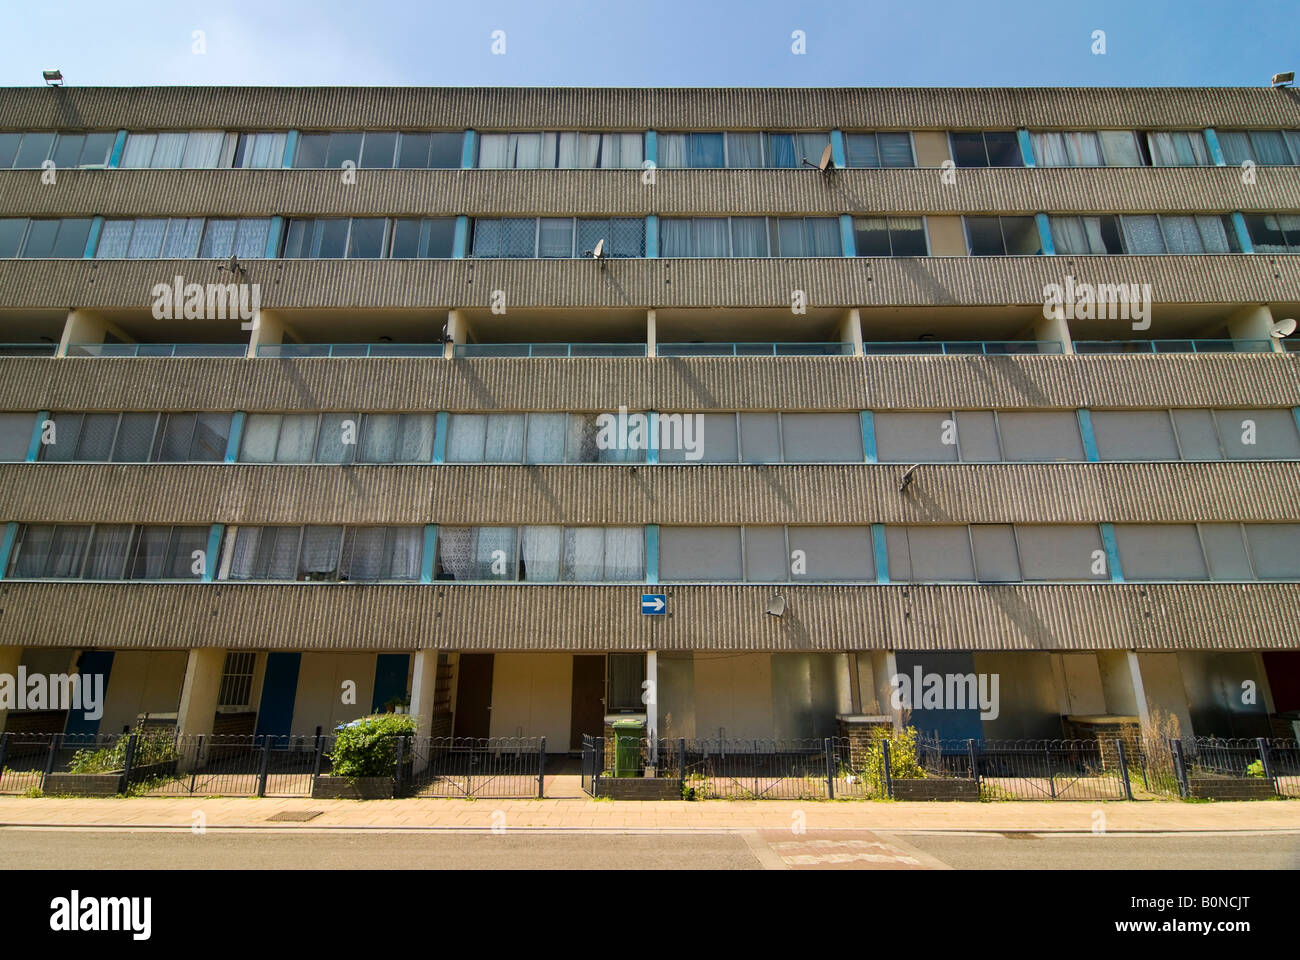 Horizontal view of the front facade of an empty block of houses on the Ferrier Estate in Kidbrooke Park on a bright sunny day Stock Photo